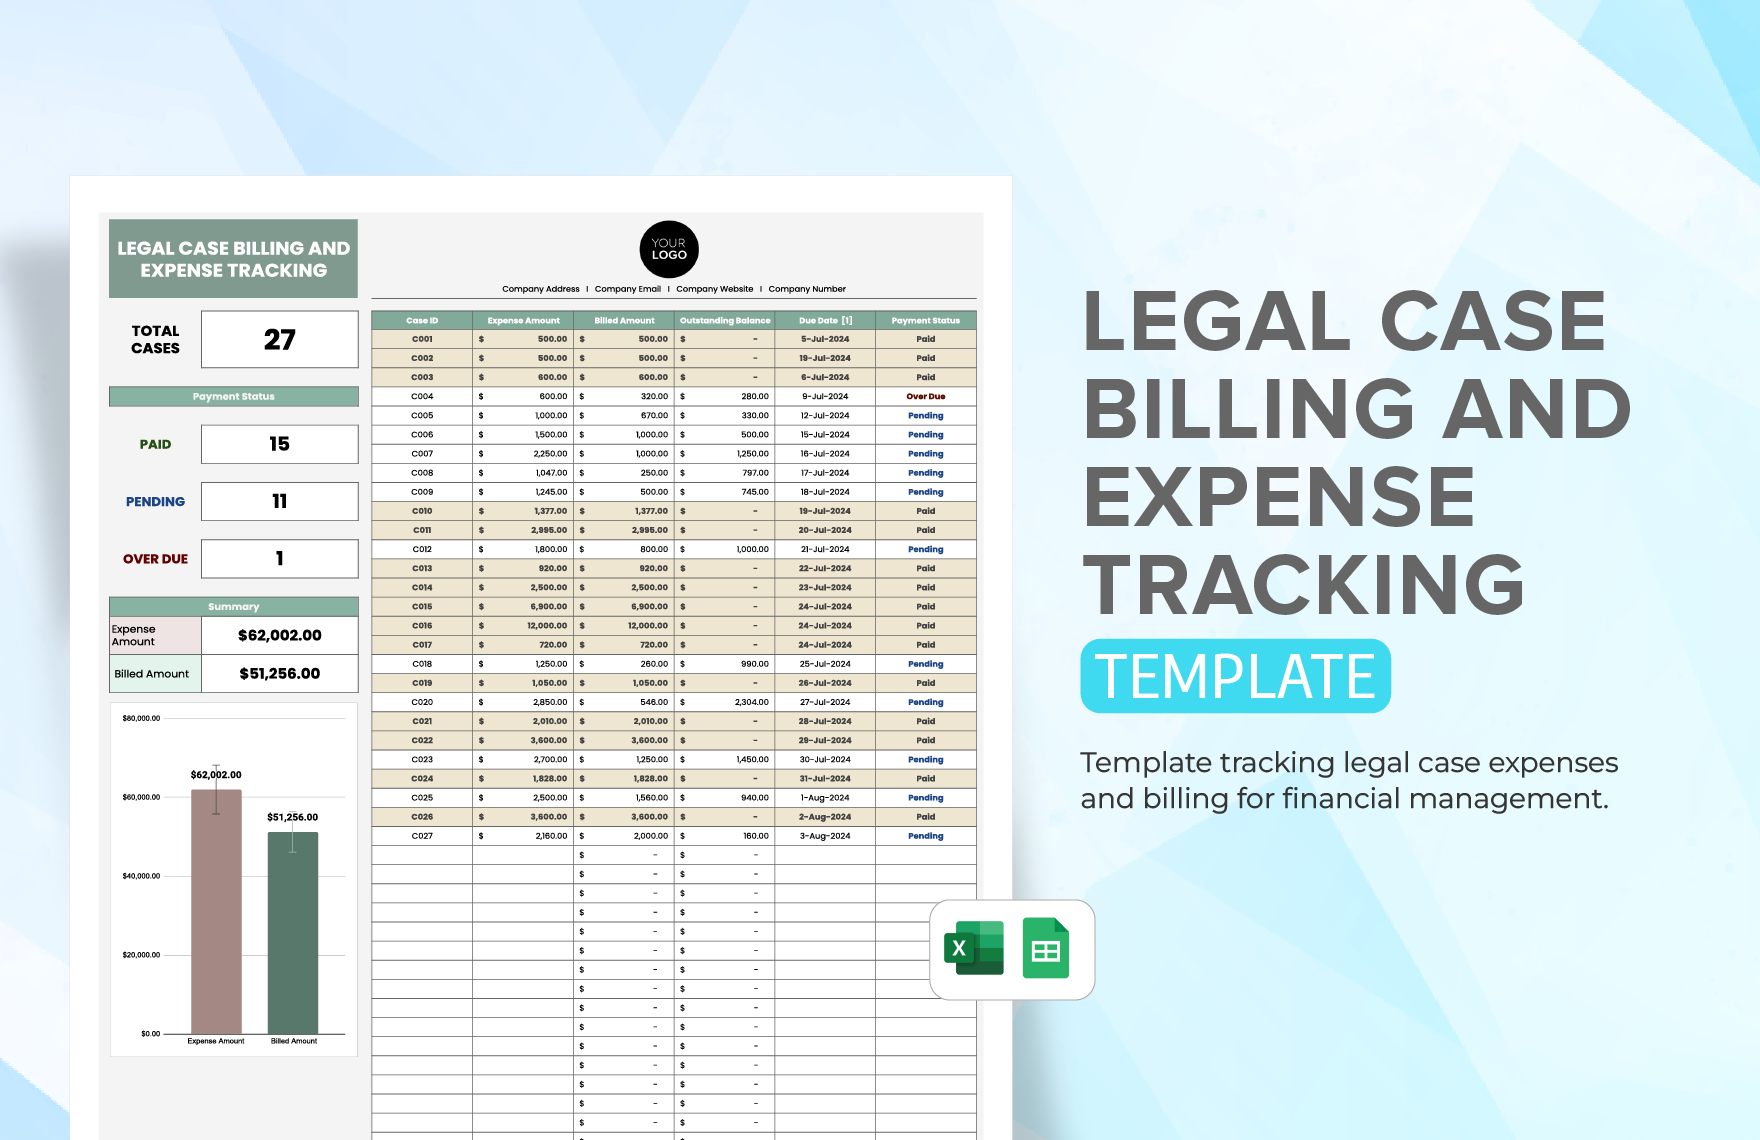 Legal Case Billing and Expense Tracking Template in Excel, Google Sheets